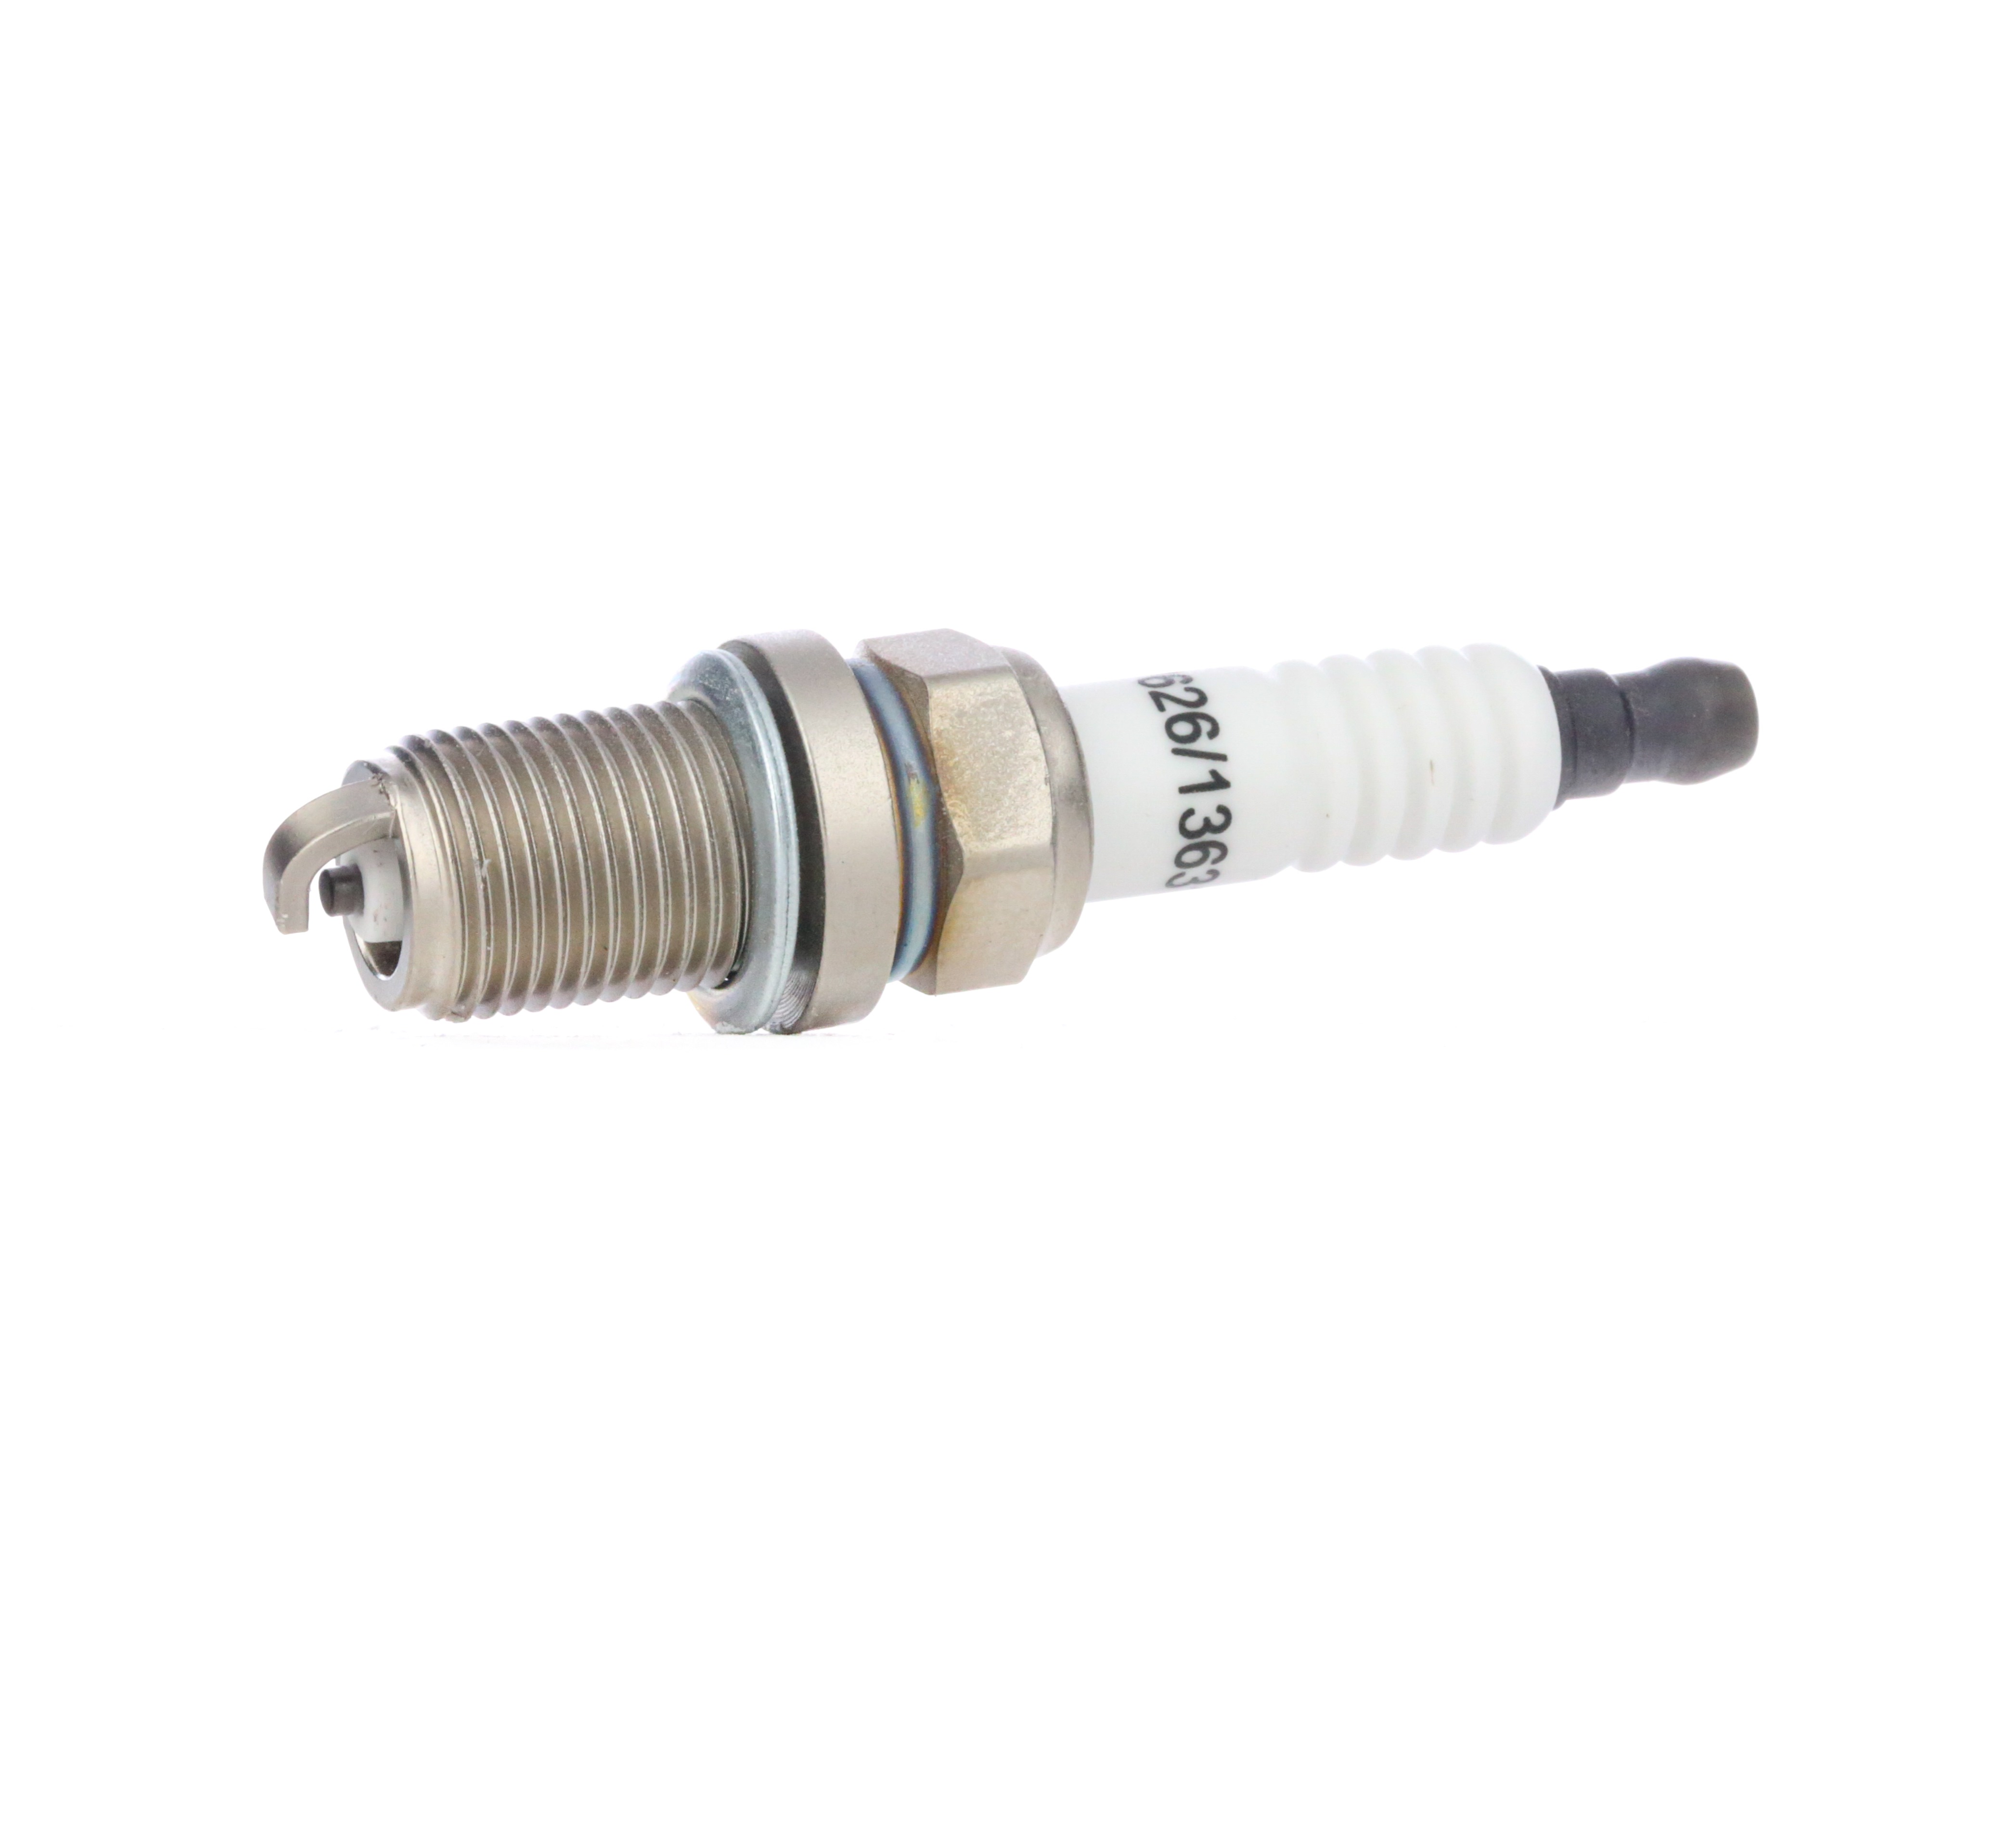 RIDEX 686S0021 Spark plug cheap in online store